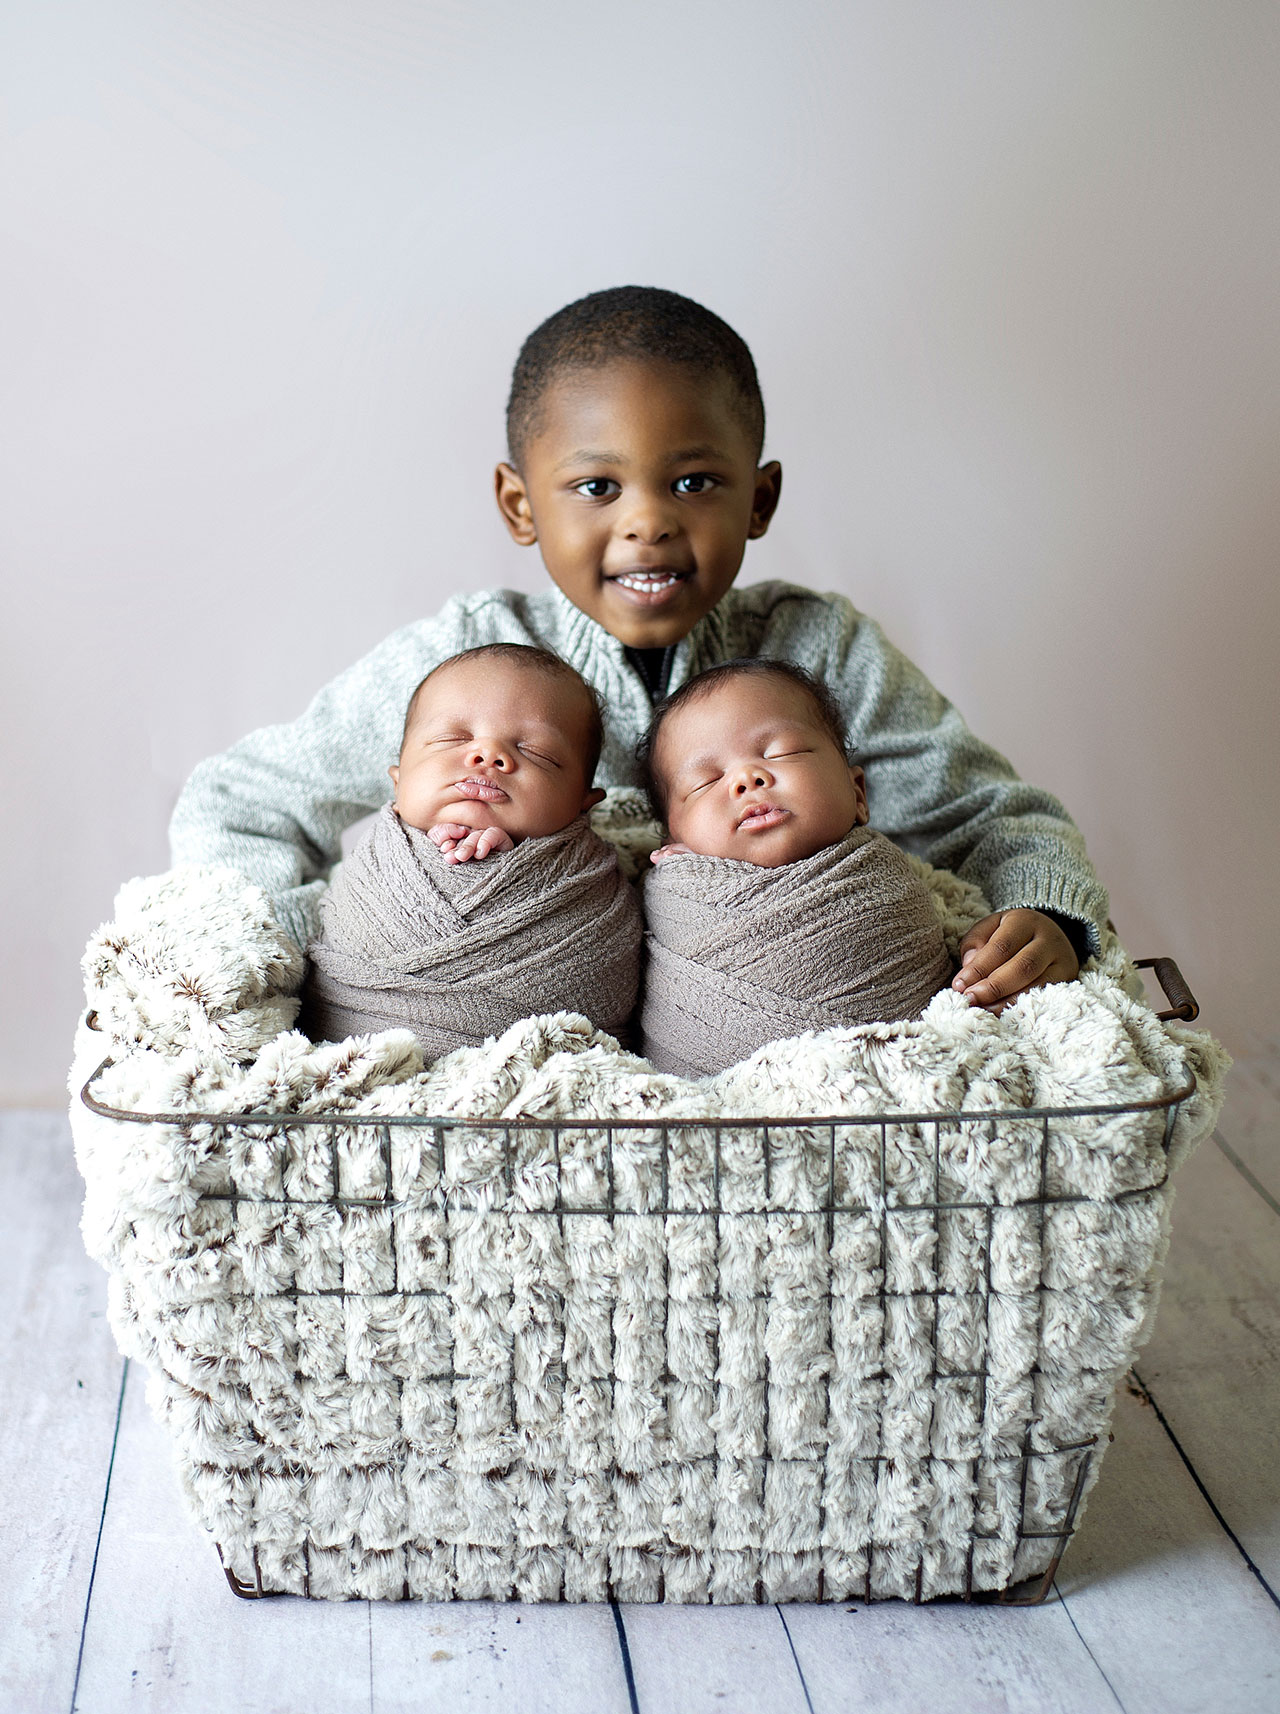 photo of baltimore newborn twins with big brother watching over them in a basket 